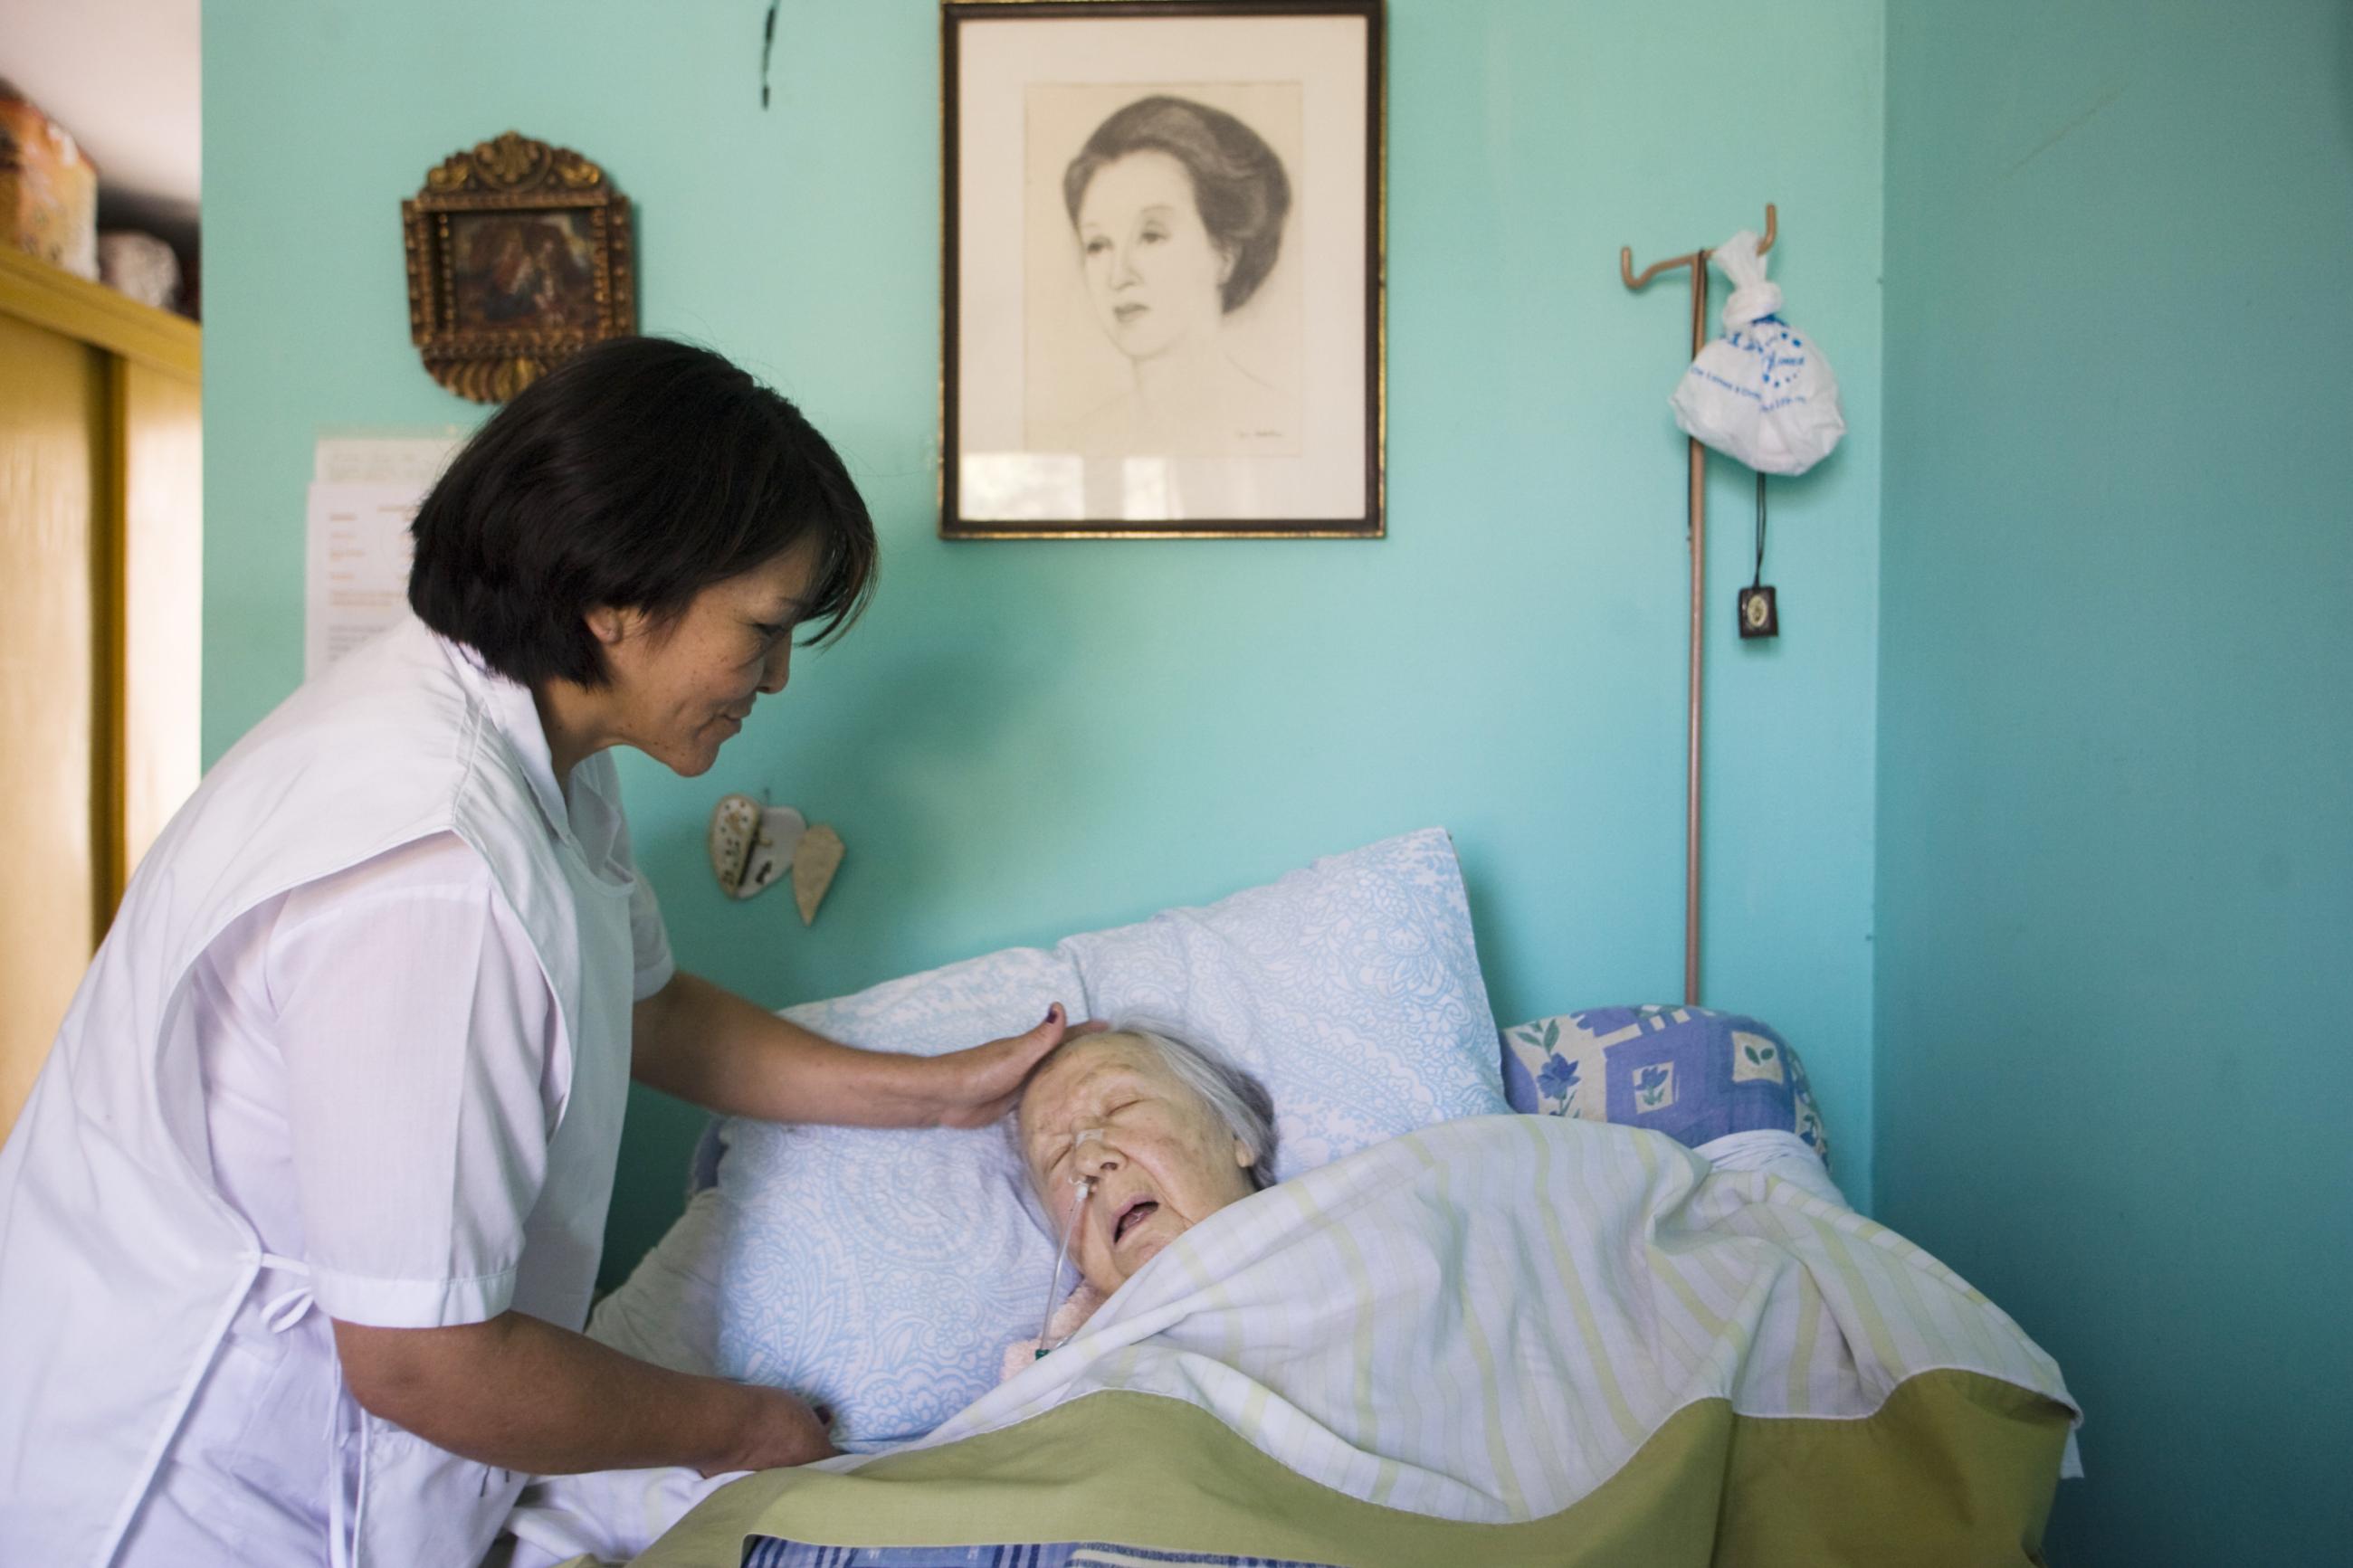 A nurse attends to an elderly woman in a home for older people with turquoise walls